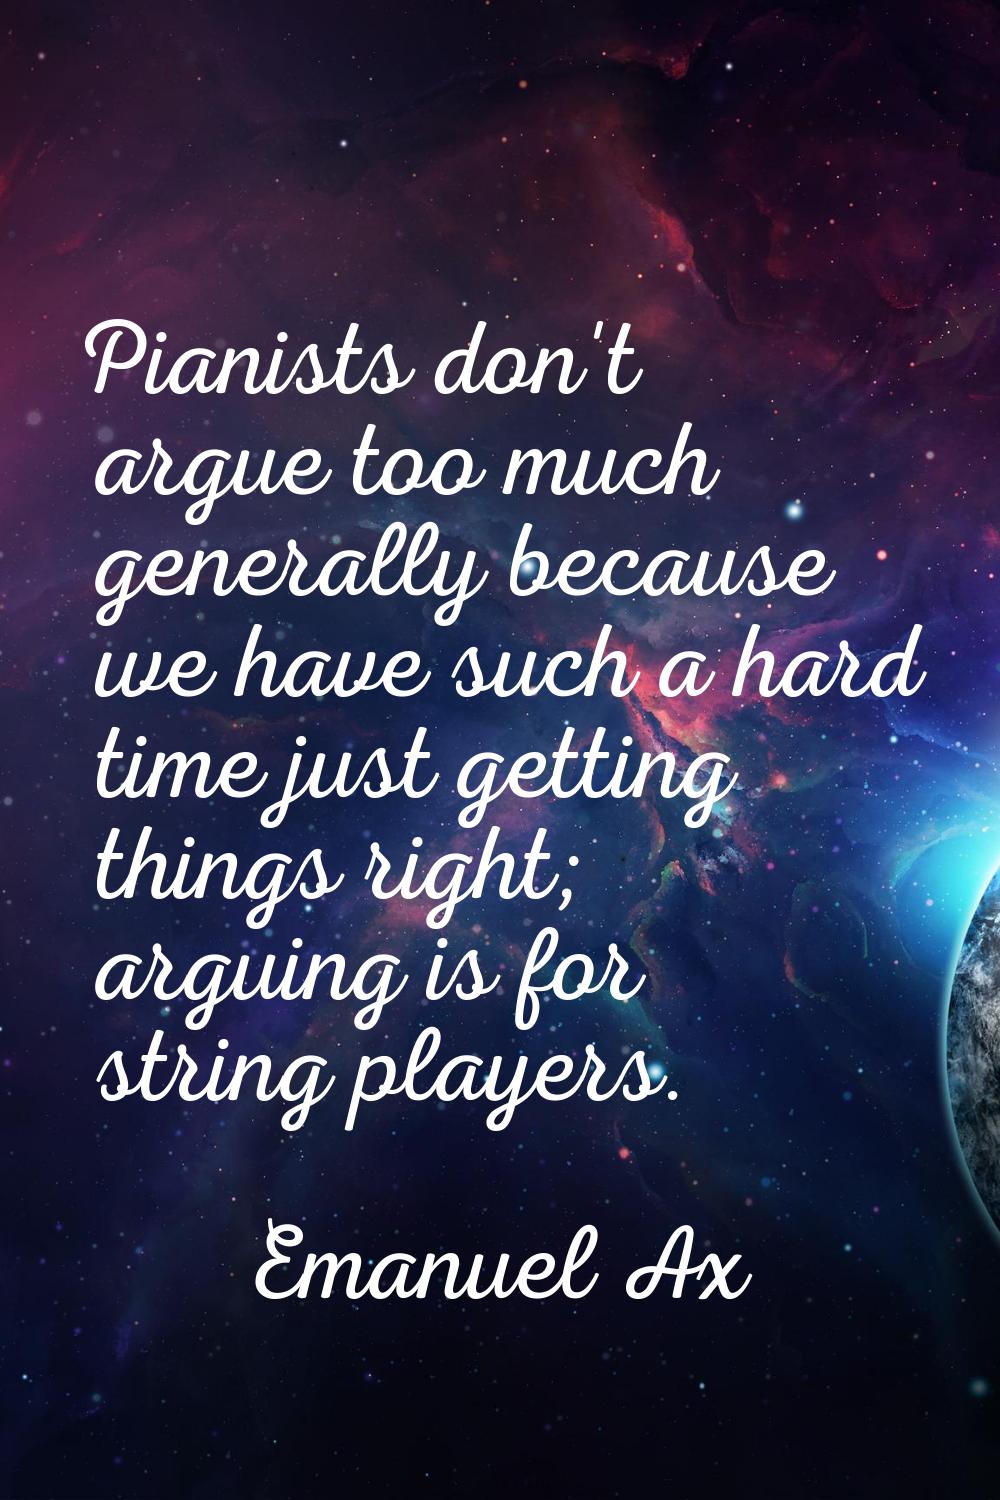 Pianists don't argue too much generally because we have such a hard time just getting things right;